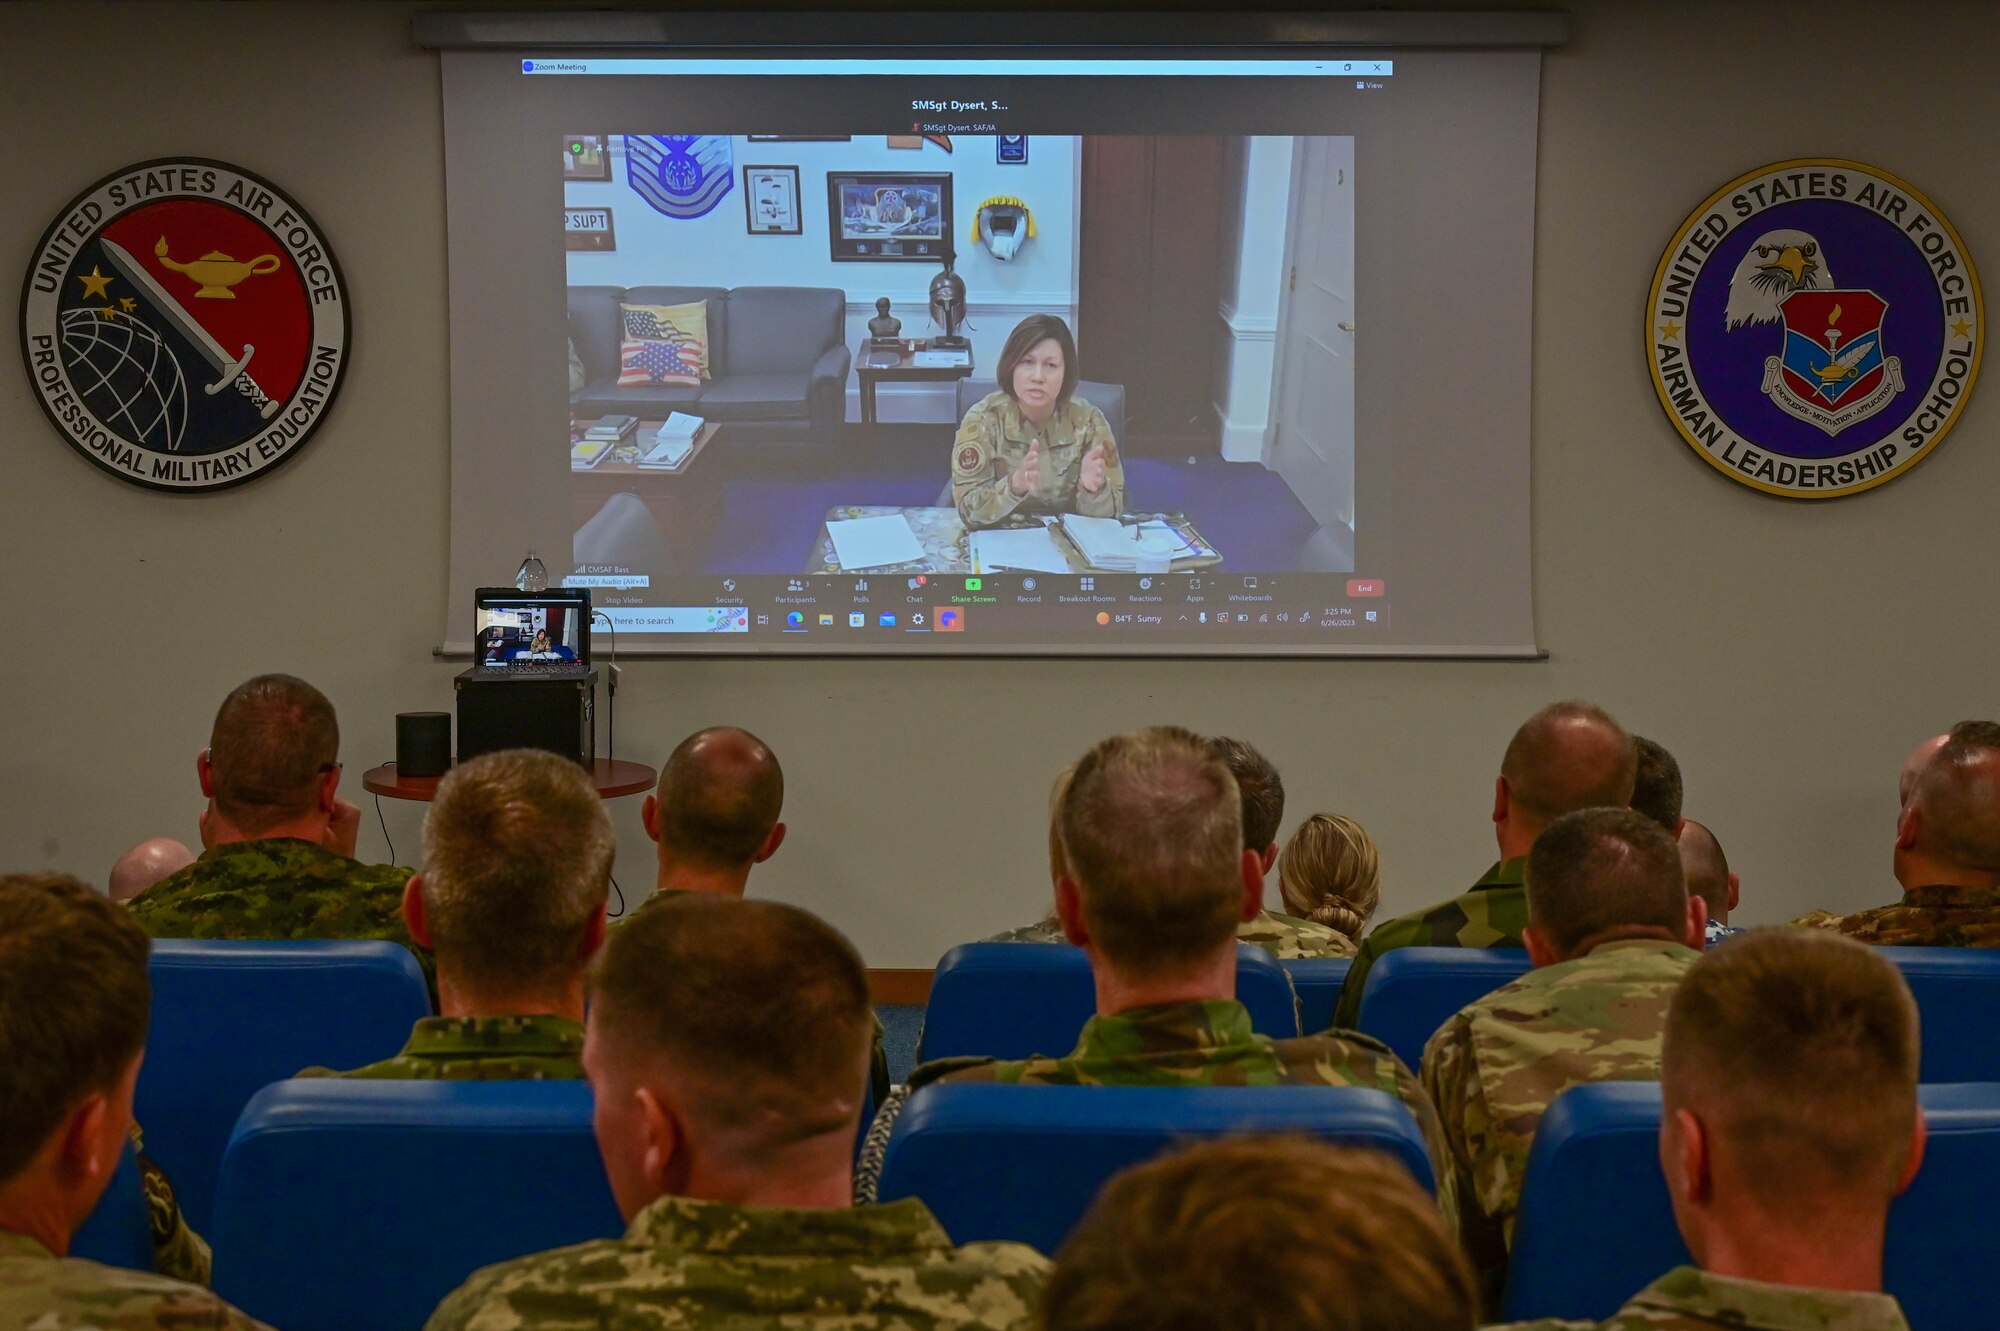 A group of people video call with Chief Bass